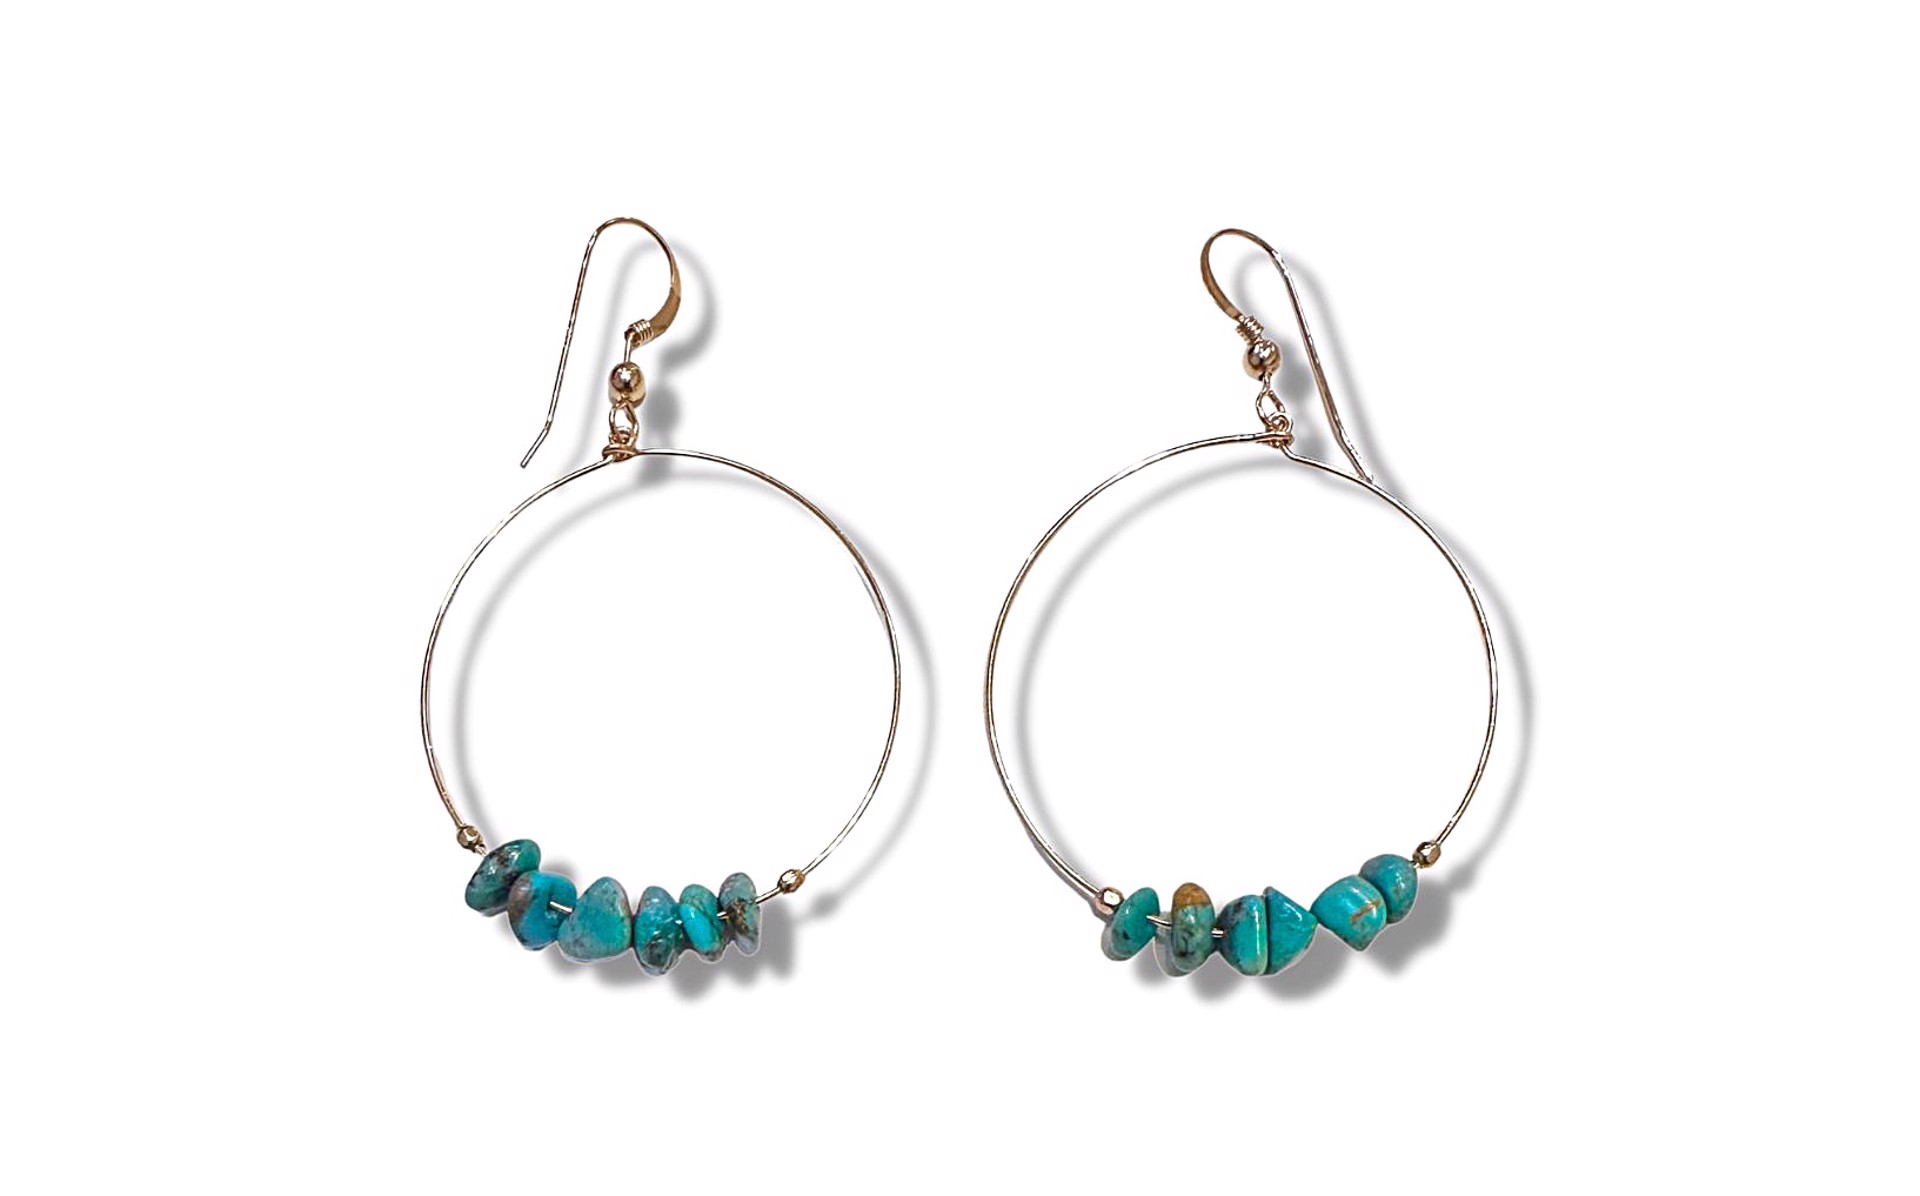 Earrings - 14K Gold Filled Hoops with Turquoise by Julia Balestracci